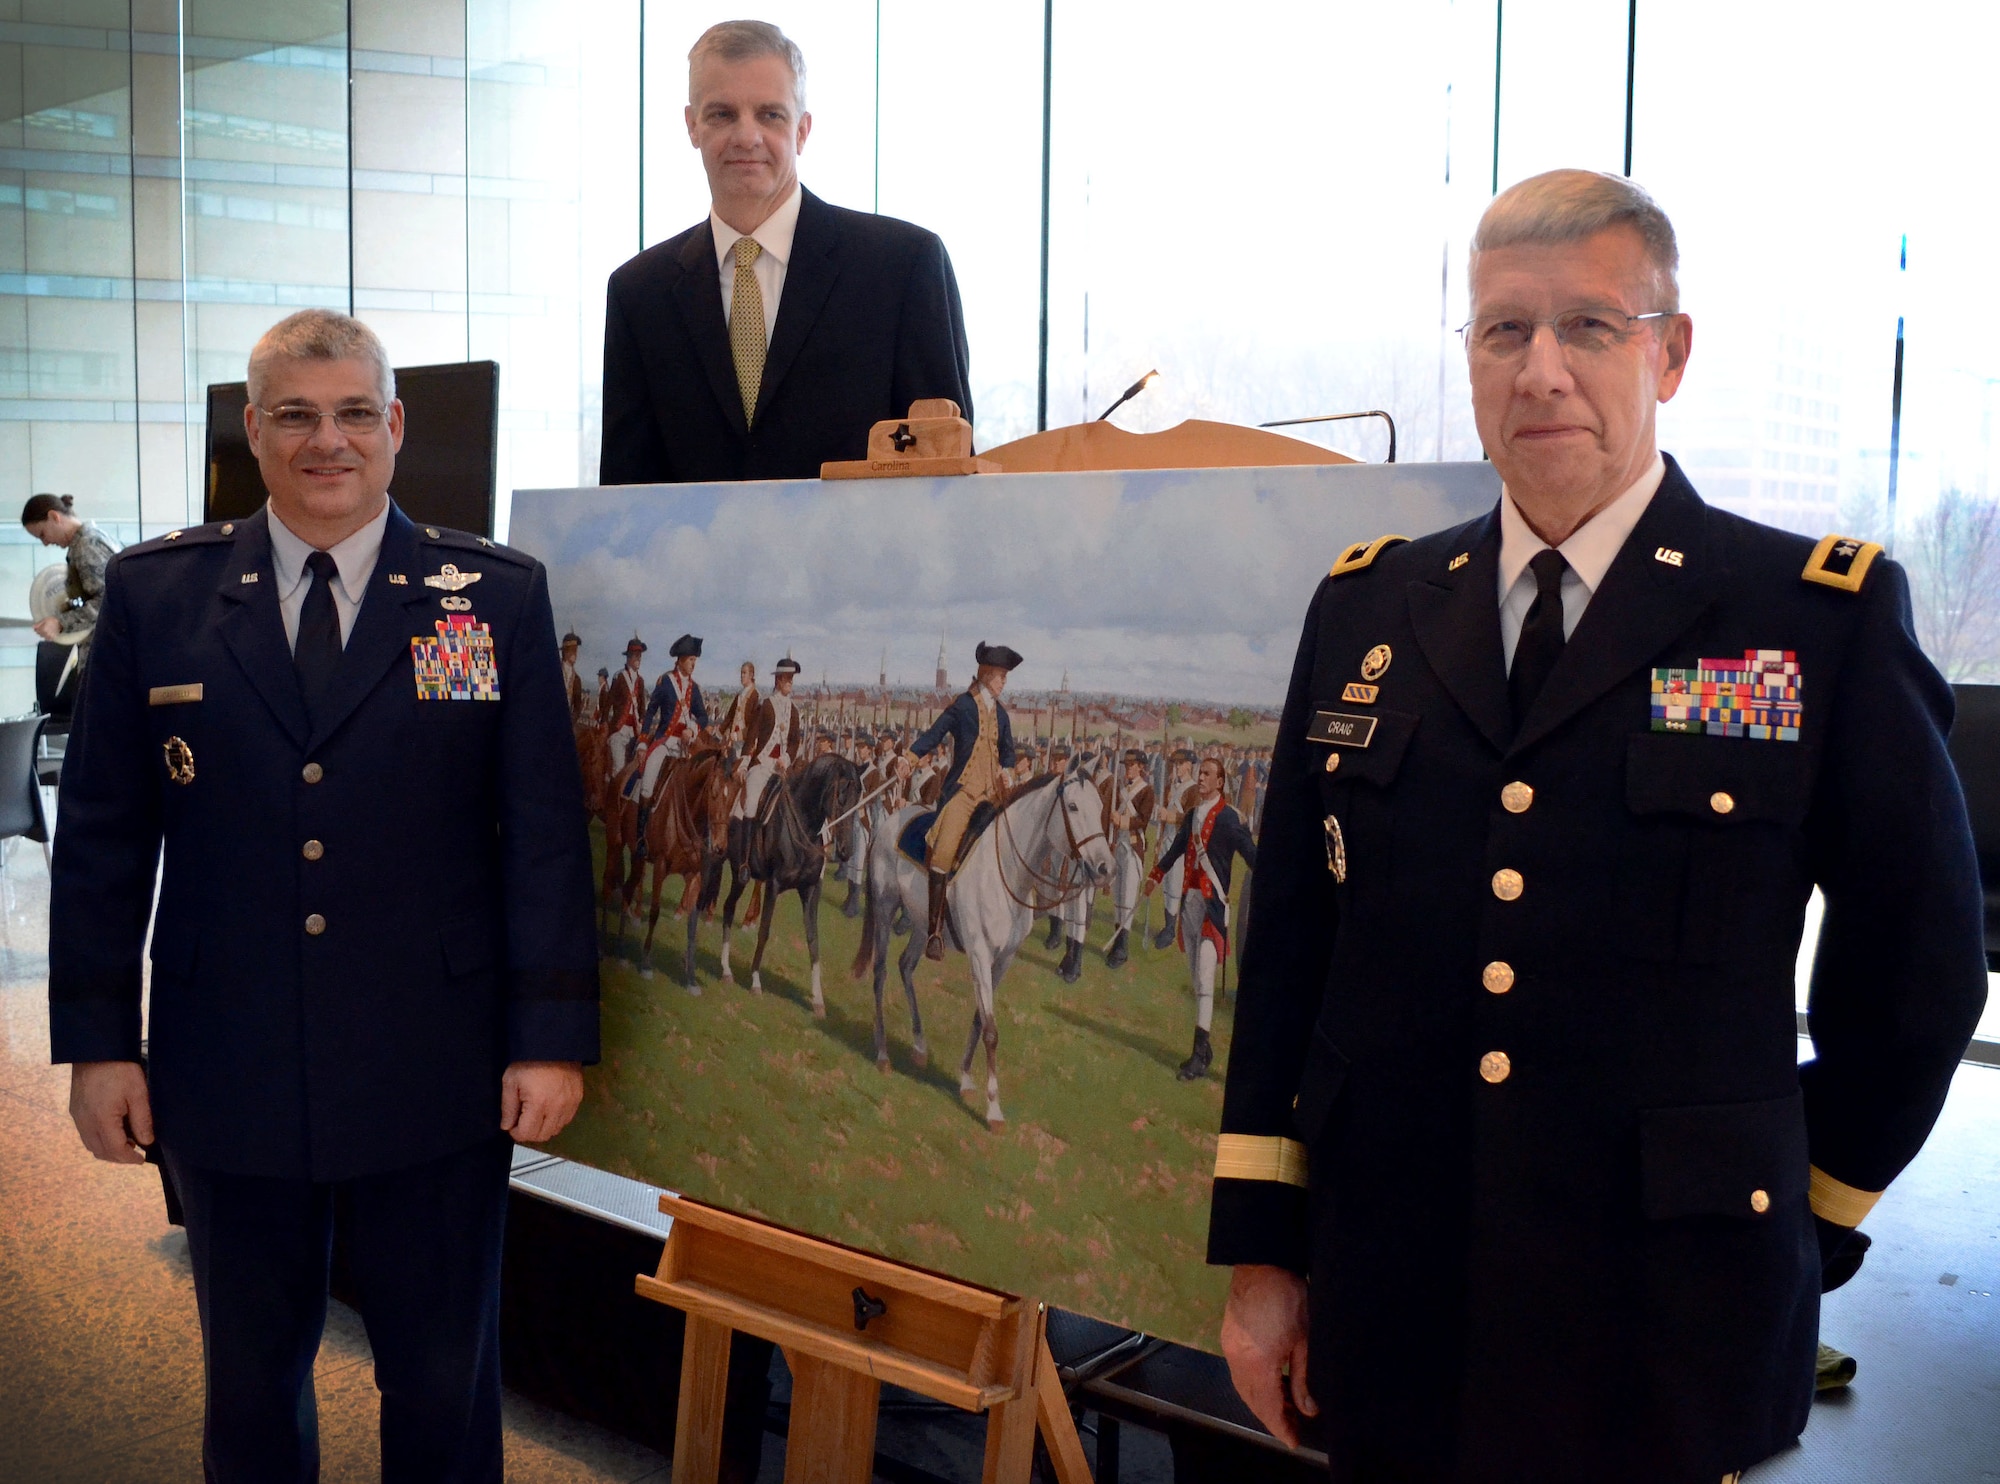 Brig. Gen. Tony J. Carrelli, Pennsylvania National Guard deputy adjutant general – air (left), Maj. Gen. Wesley E. Craig, Pa. National Guard adjutant general (right) and artist Larry Selman pose in front of Selman’s painting, “Washington’s Review”, Dec. 6, 2014, at the National Constitution Center, Philadelphia, Pa. The painting was commissioned on behalf of the Pa. National Guard and unveiled during its 267th birthday celebration. (U.S. Air National Guard photo by Master Sgt. Christopher Botzum/Released)